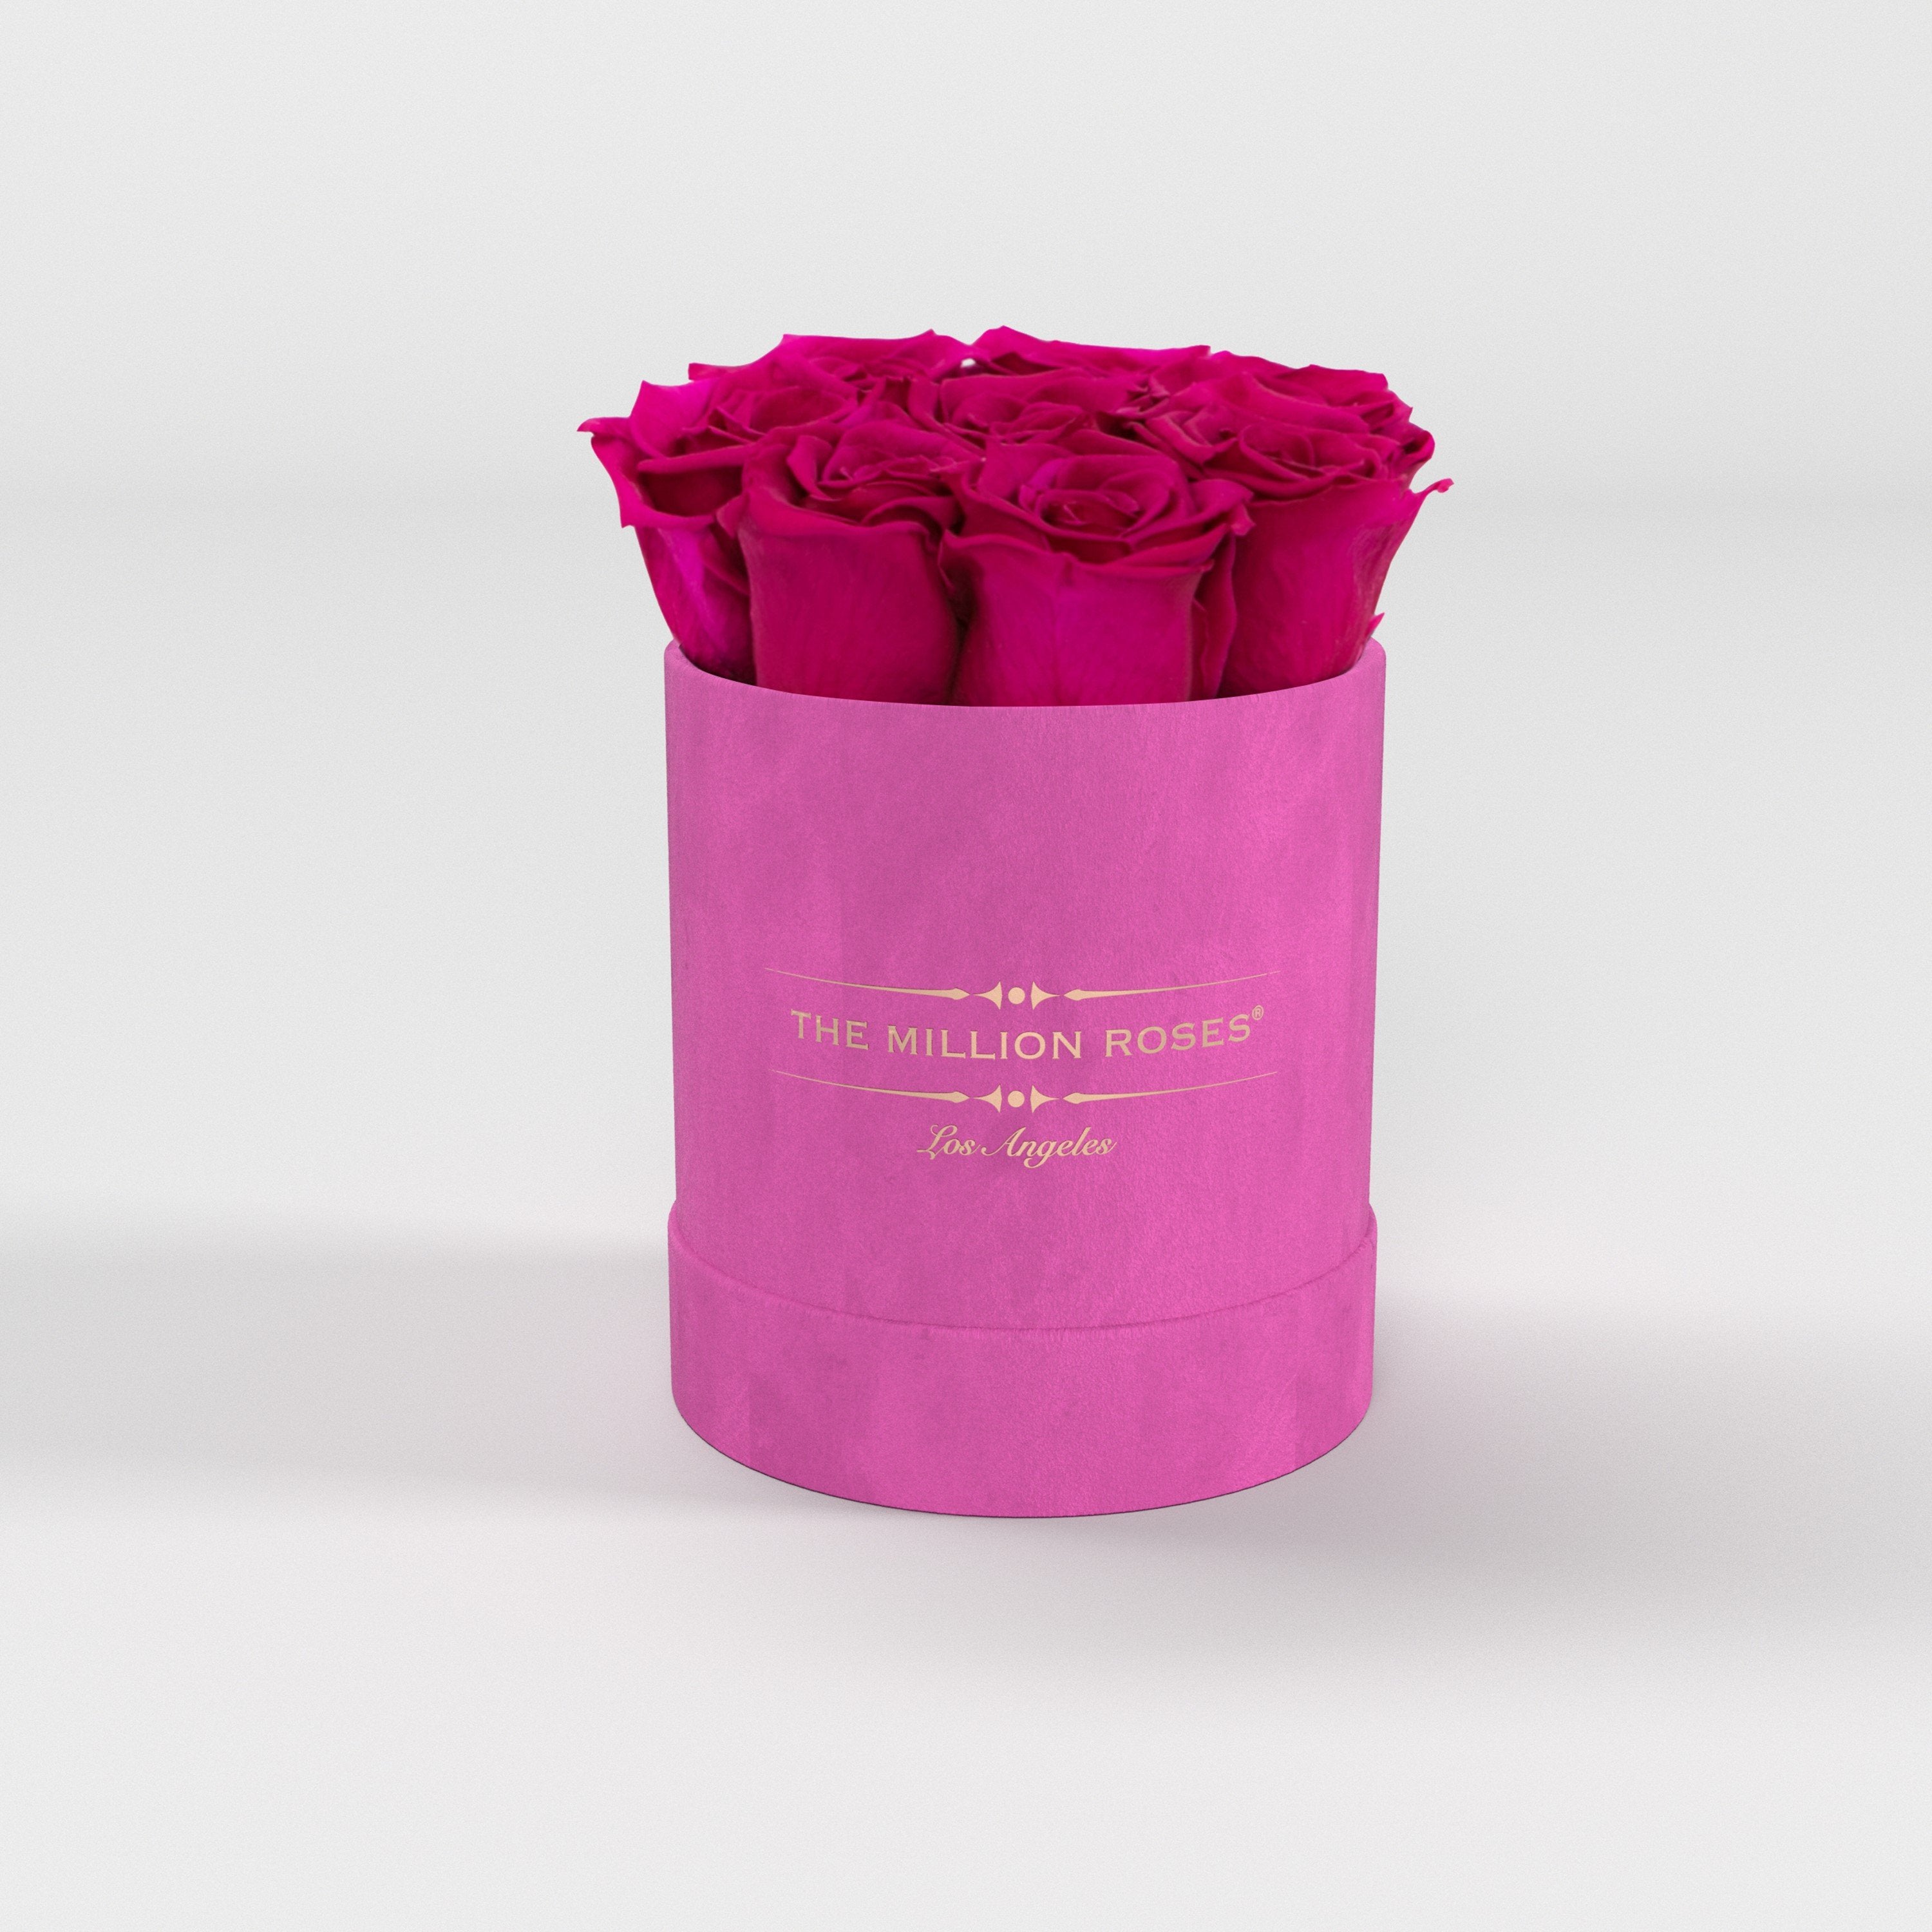 ( LA ) Hot Pink - Suede - Basic Box with Magenta Roses Kit - the million roses